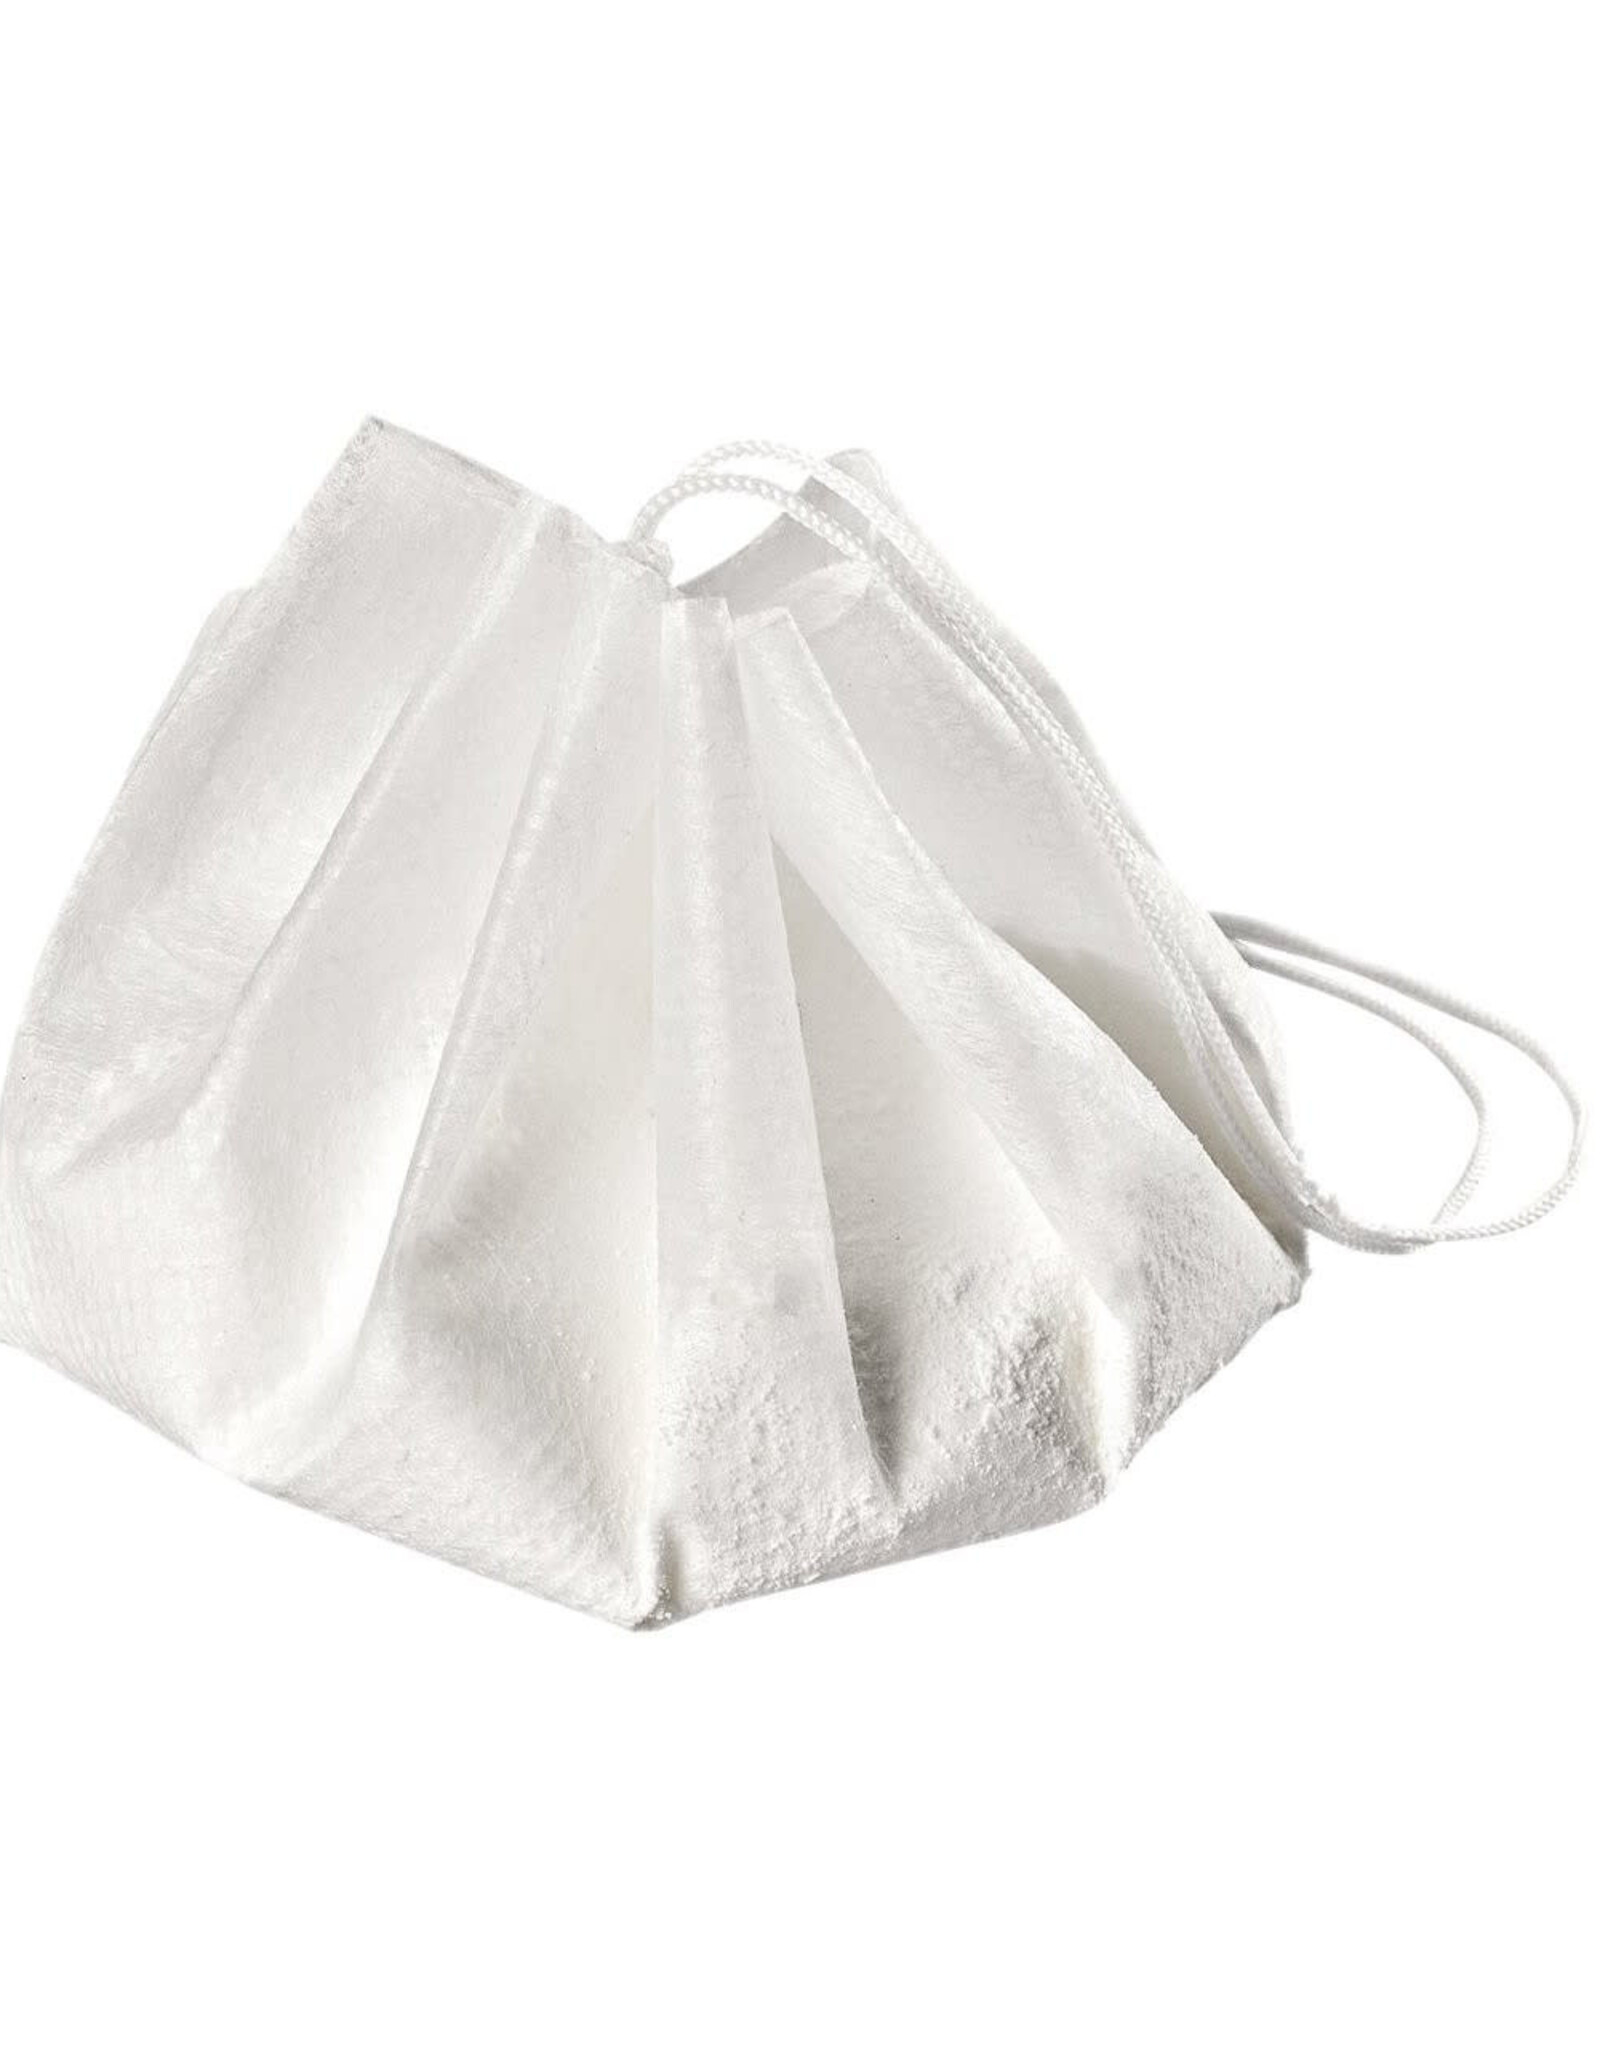 Dusting Pouches, set of 4